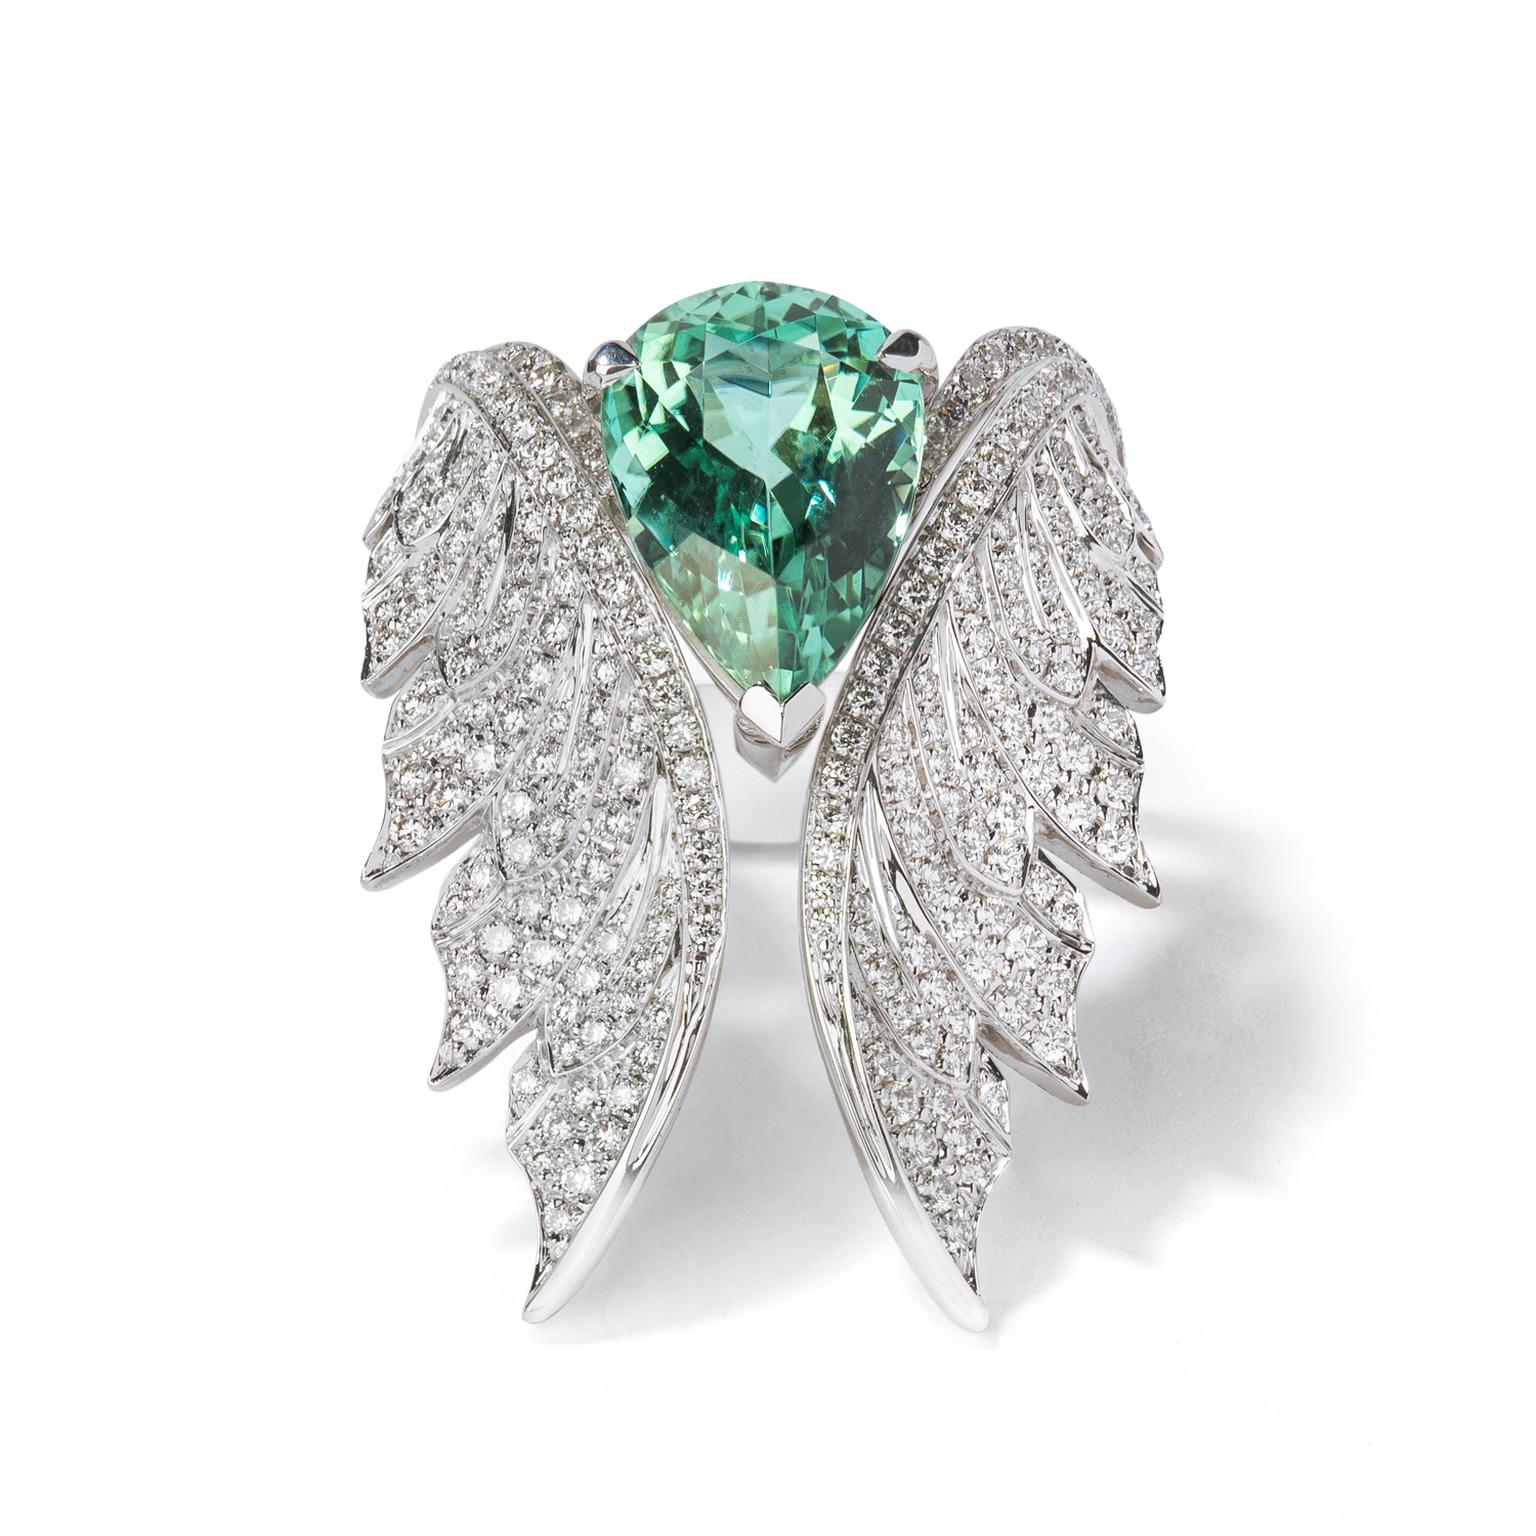 Stephen Webster Magnipheasant open feather ring and green tourmaline cocktail ring